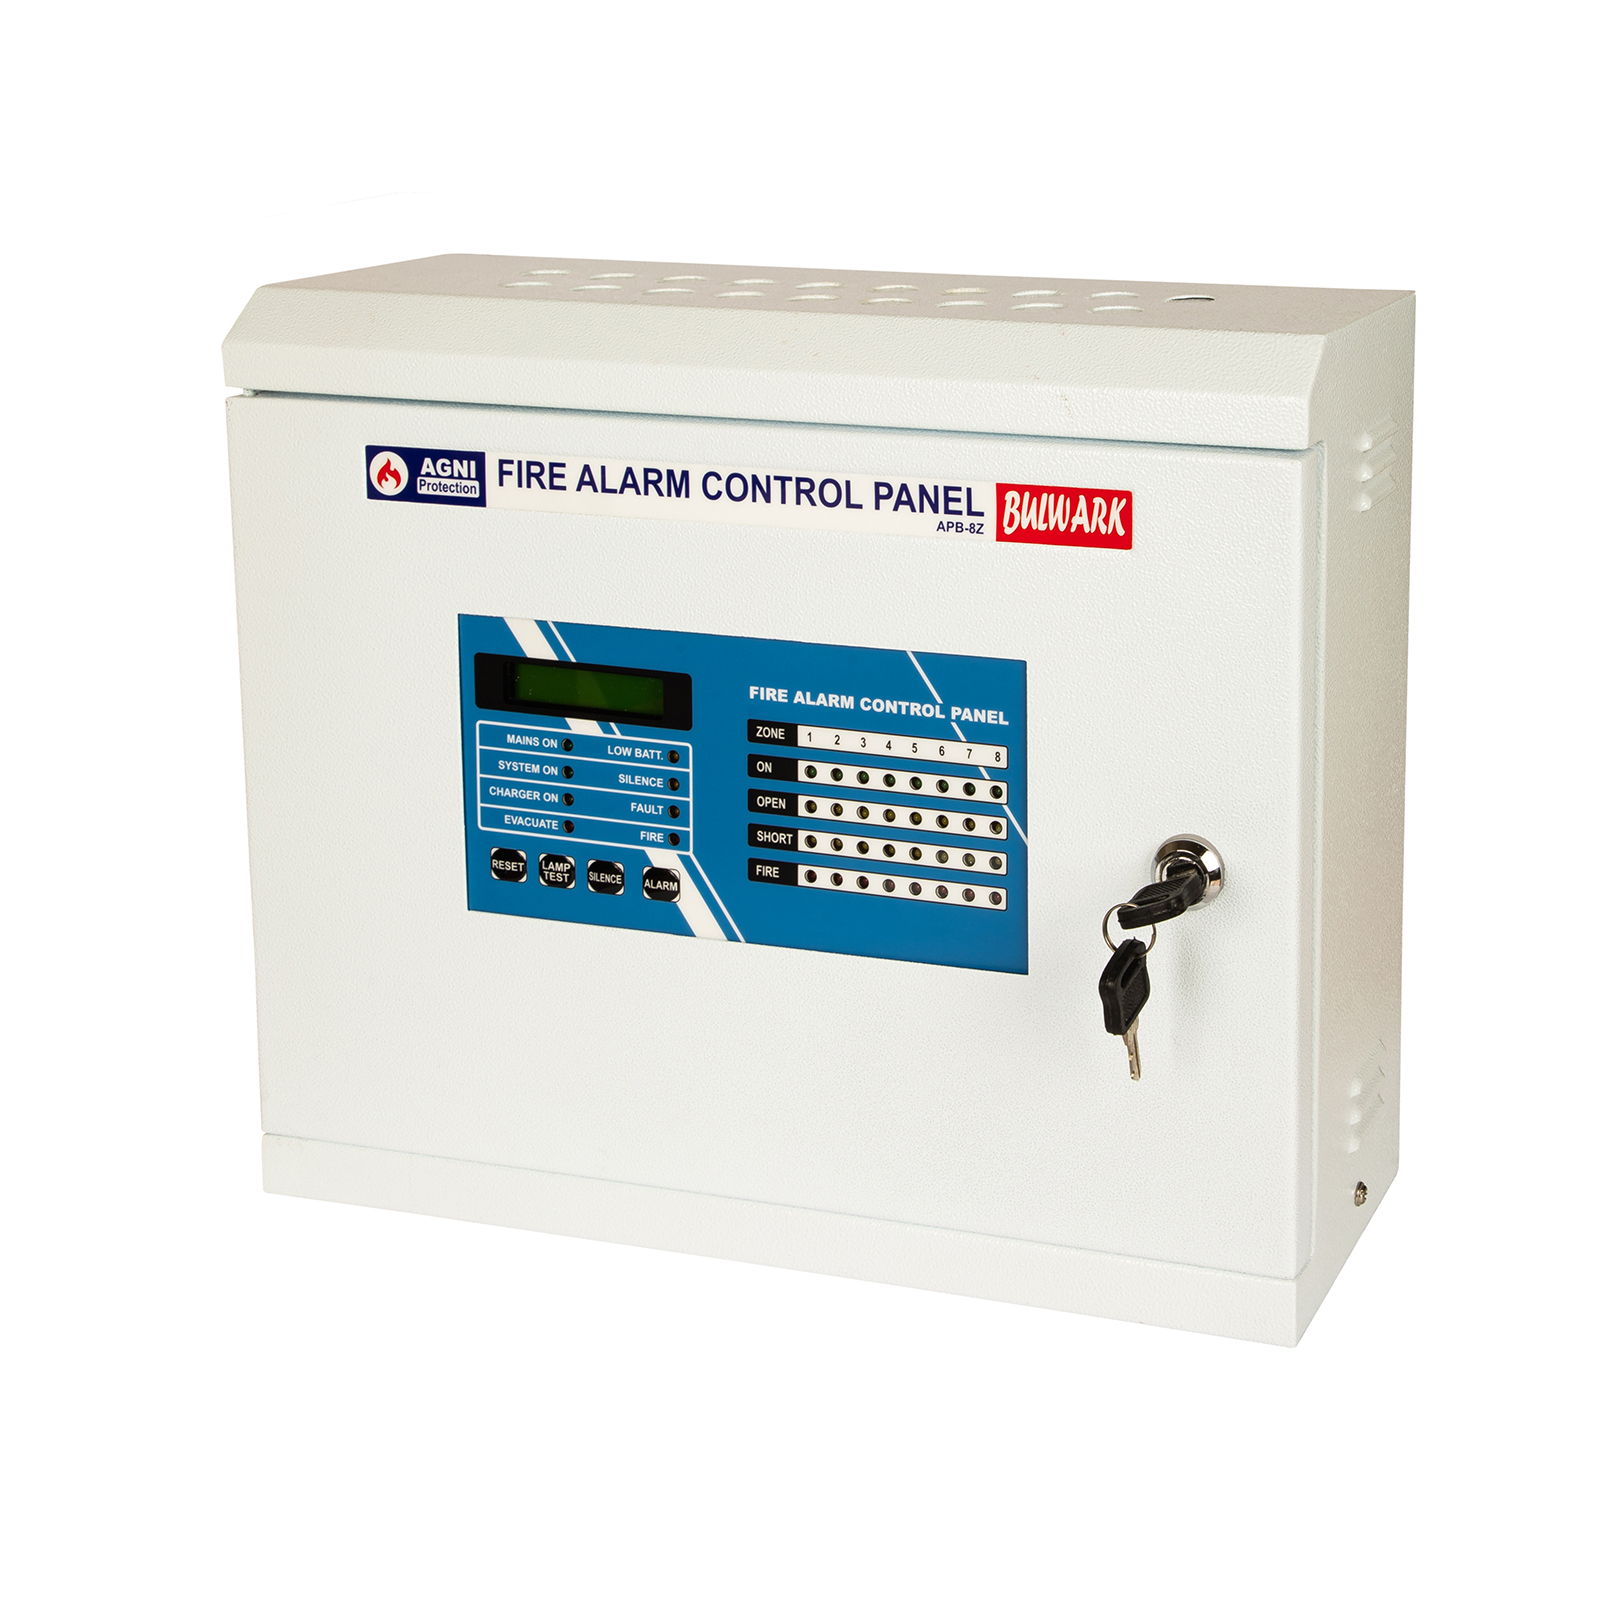 10 ZONE CONVENTIONAL FIRE ALARM PANEL